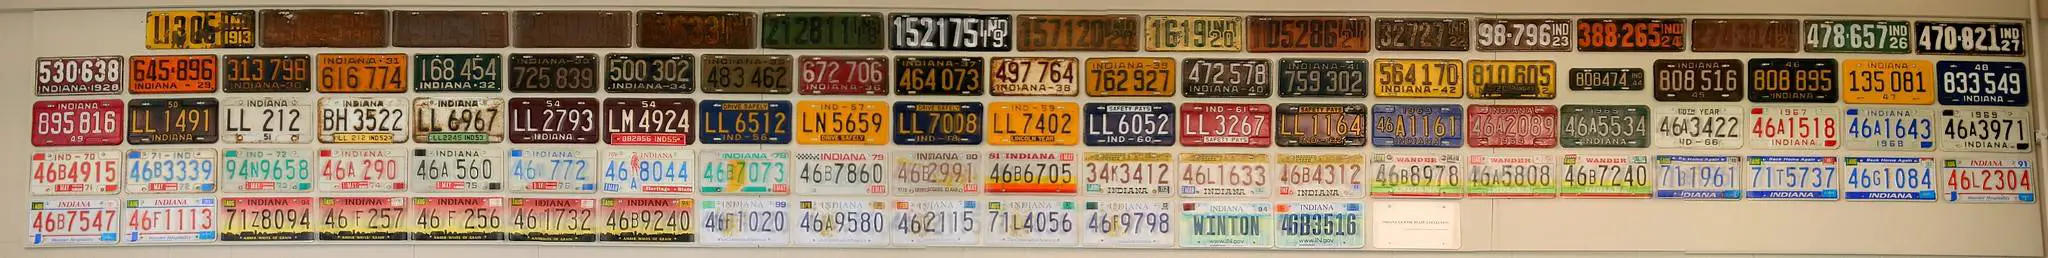 Indiana license plate numbers have a cool meaning behind them!